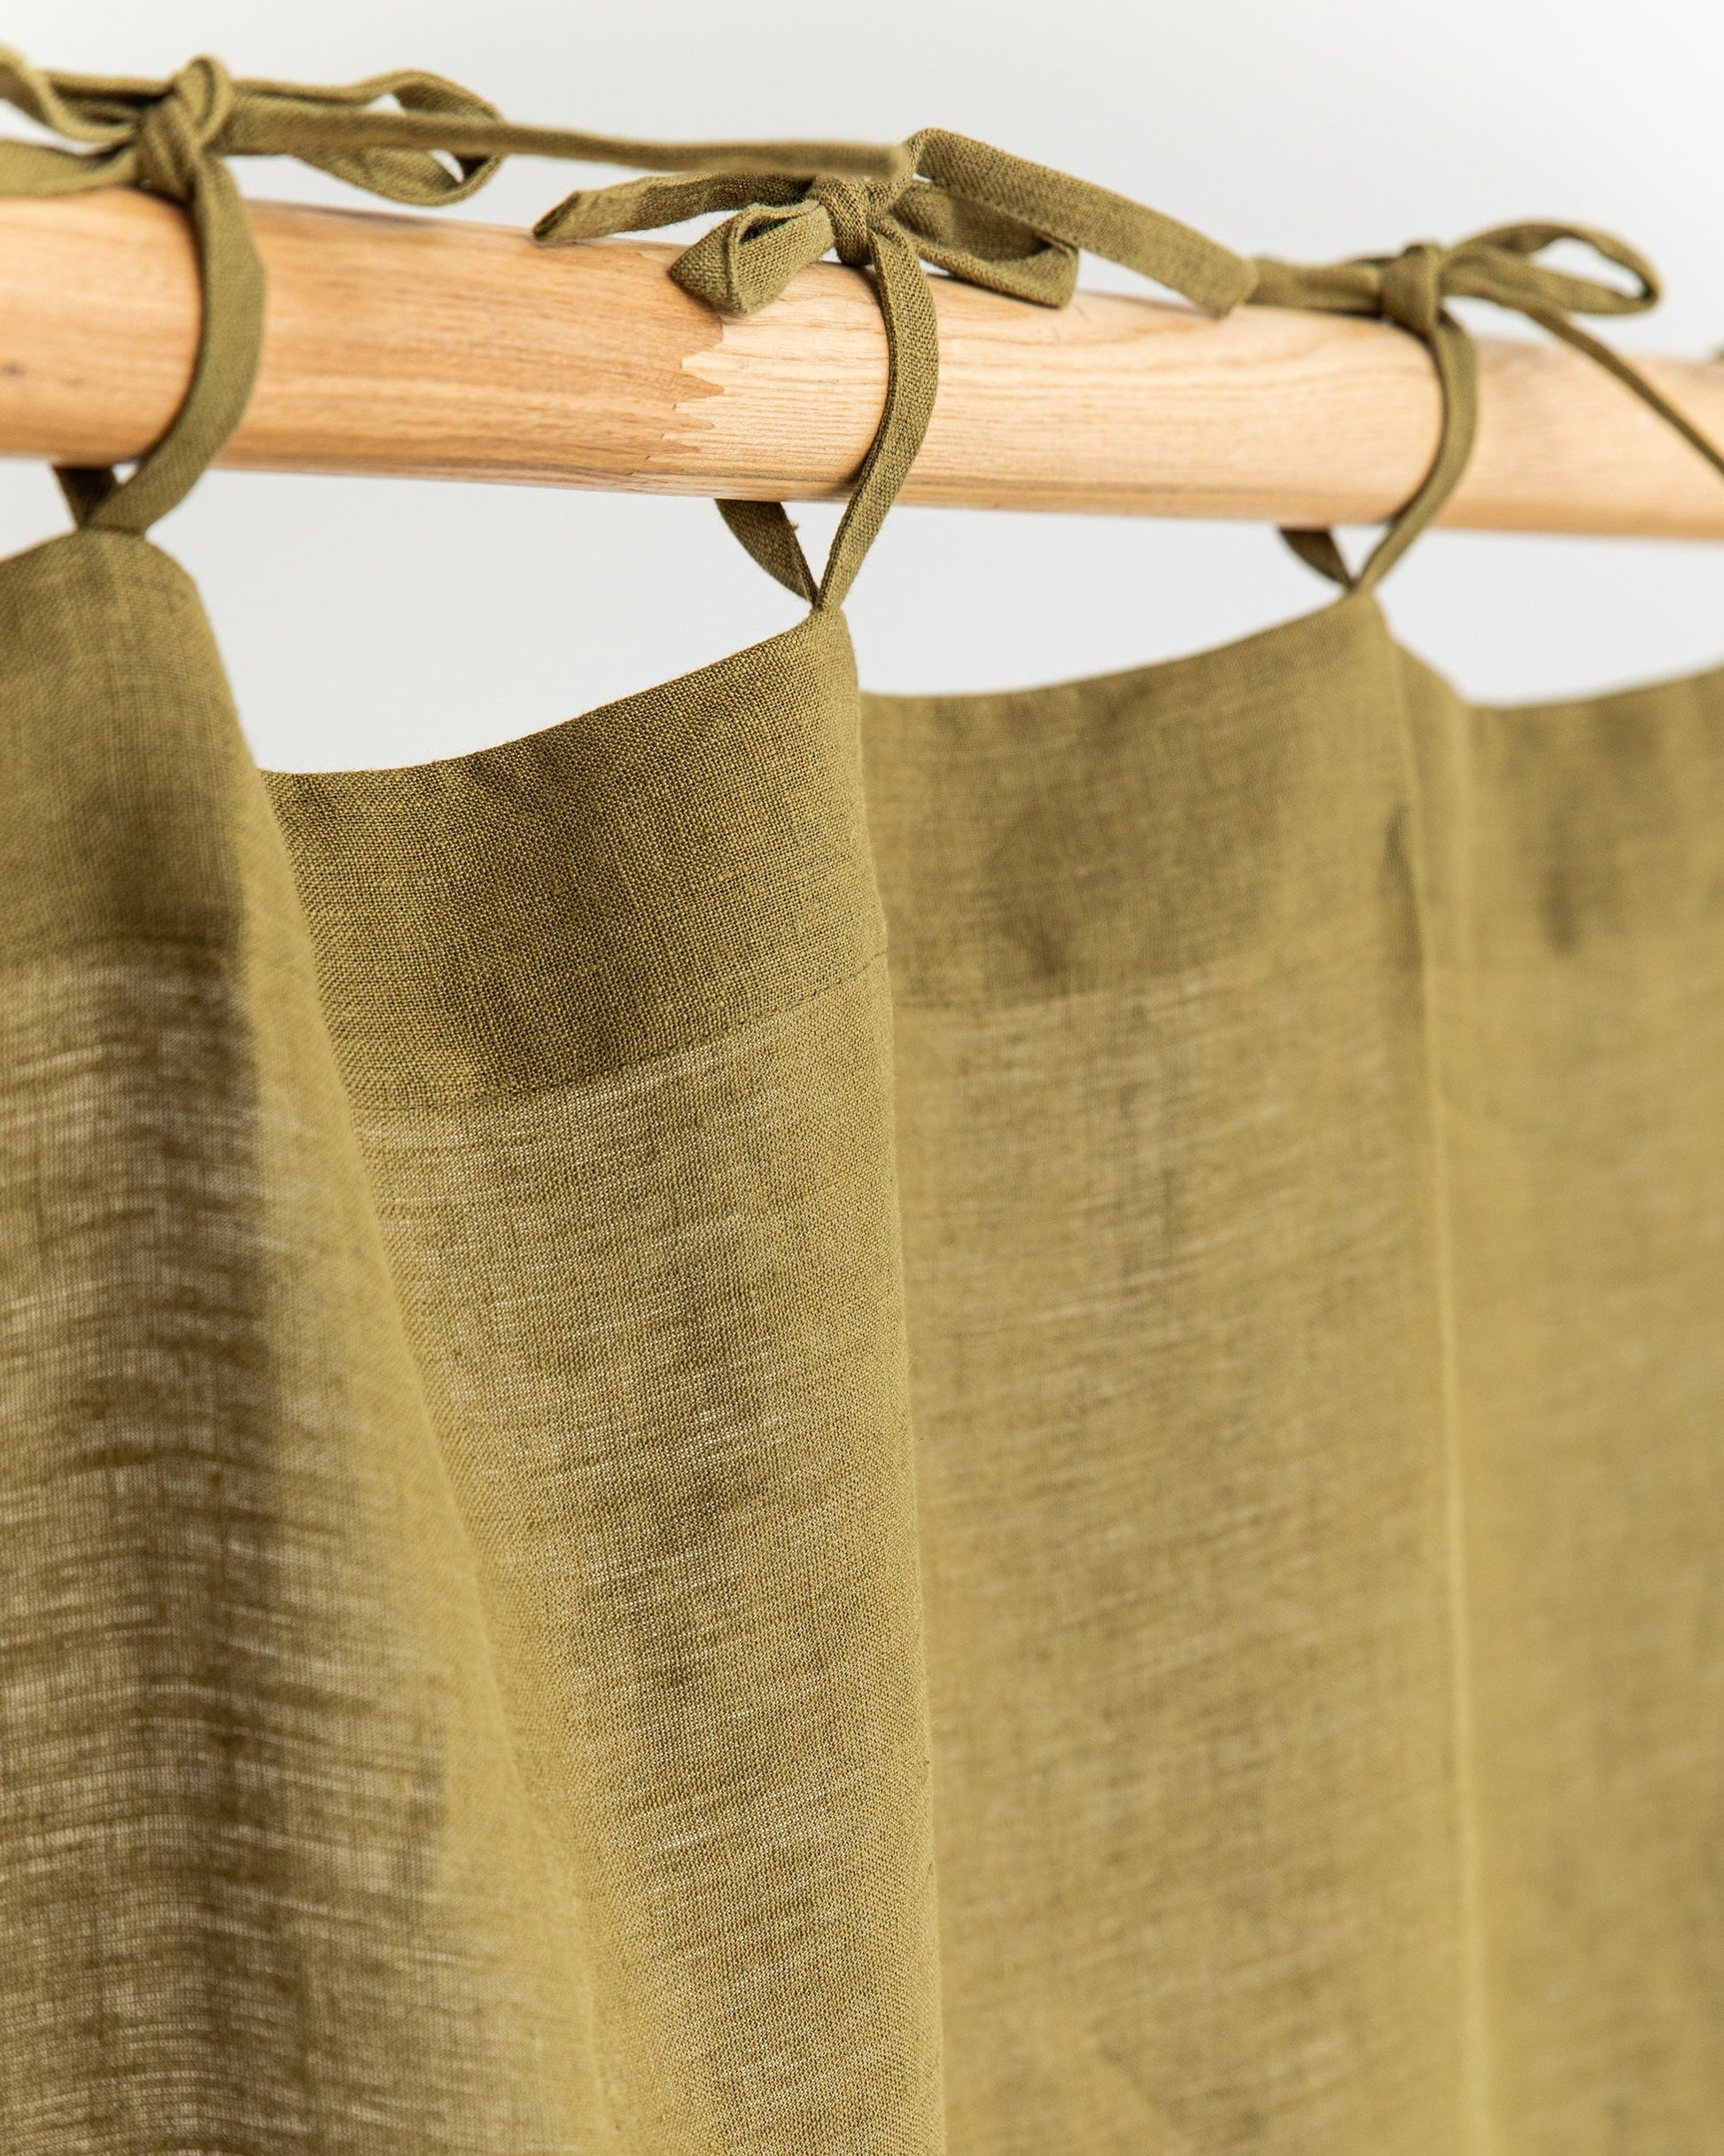 Tie top linen curtain panel (1 pcs) in Olive green - MagicLinen